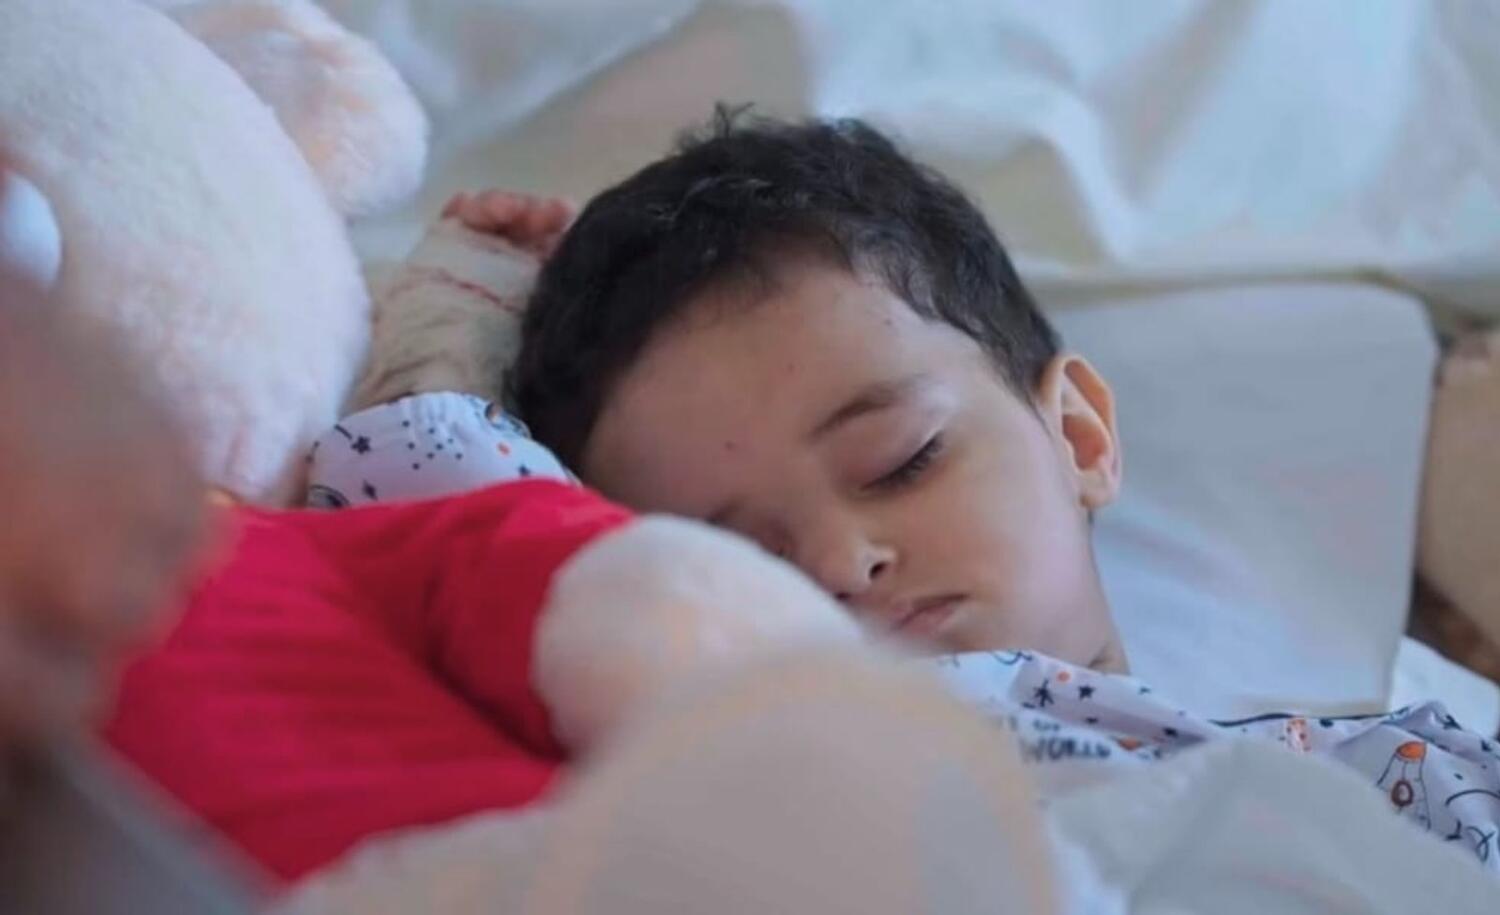 Fati Ala, One-and-a-half-year-old Palestinian boy.He suffered burn injuries during Gaza war. Now, he is sleeping peacefully, with a teddy bear doll at a private hospital in Abu Dhabi. He will no longer wake up due to the deafening sounds of Israeli bombardment. Fati Ala is on the path to recovery, and a semblance of normalcy is gradually returning to his life.